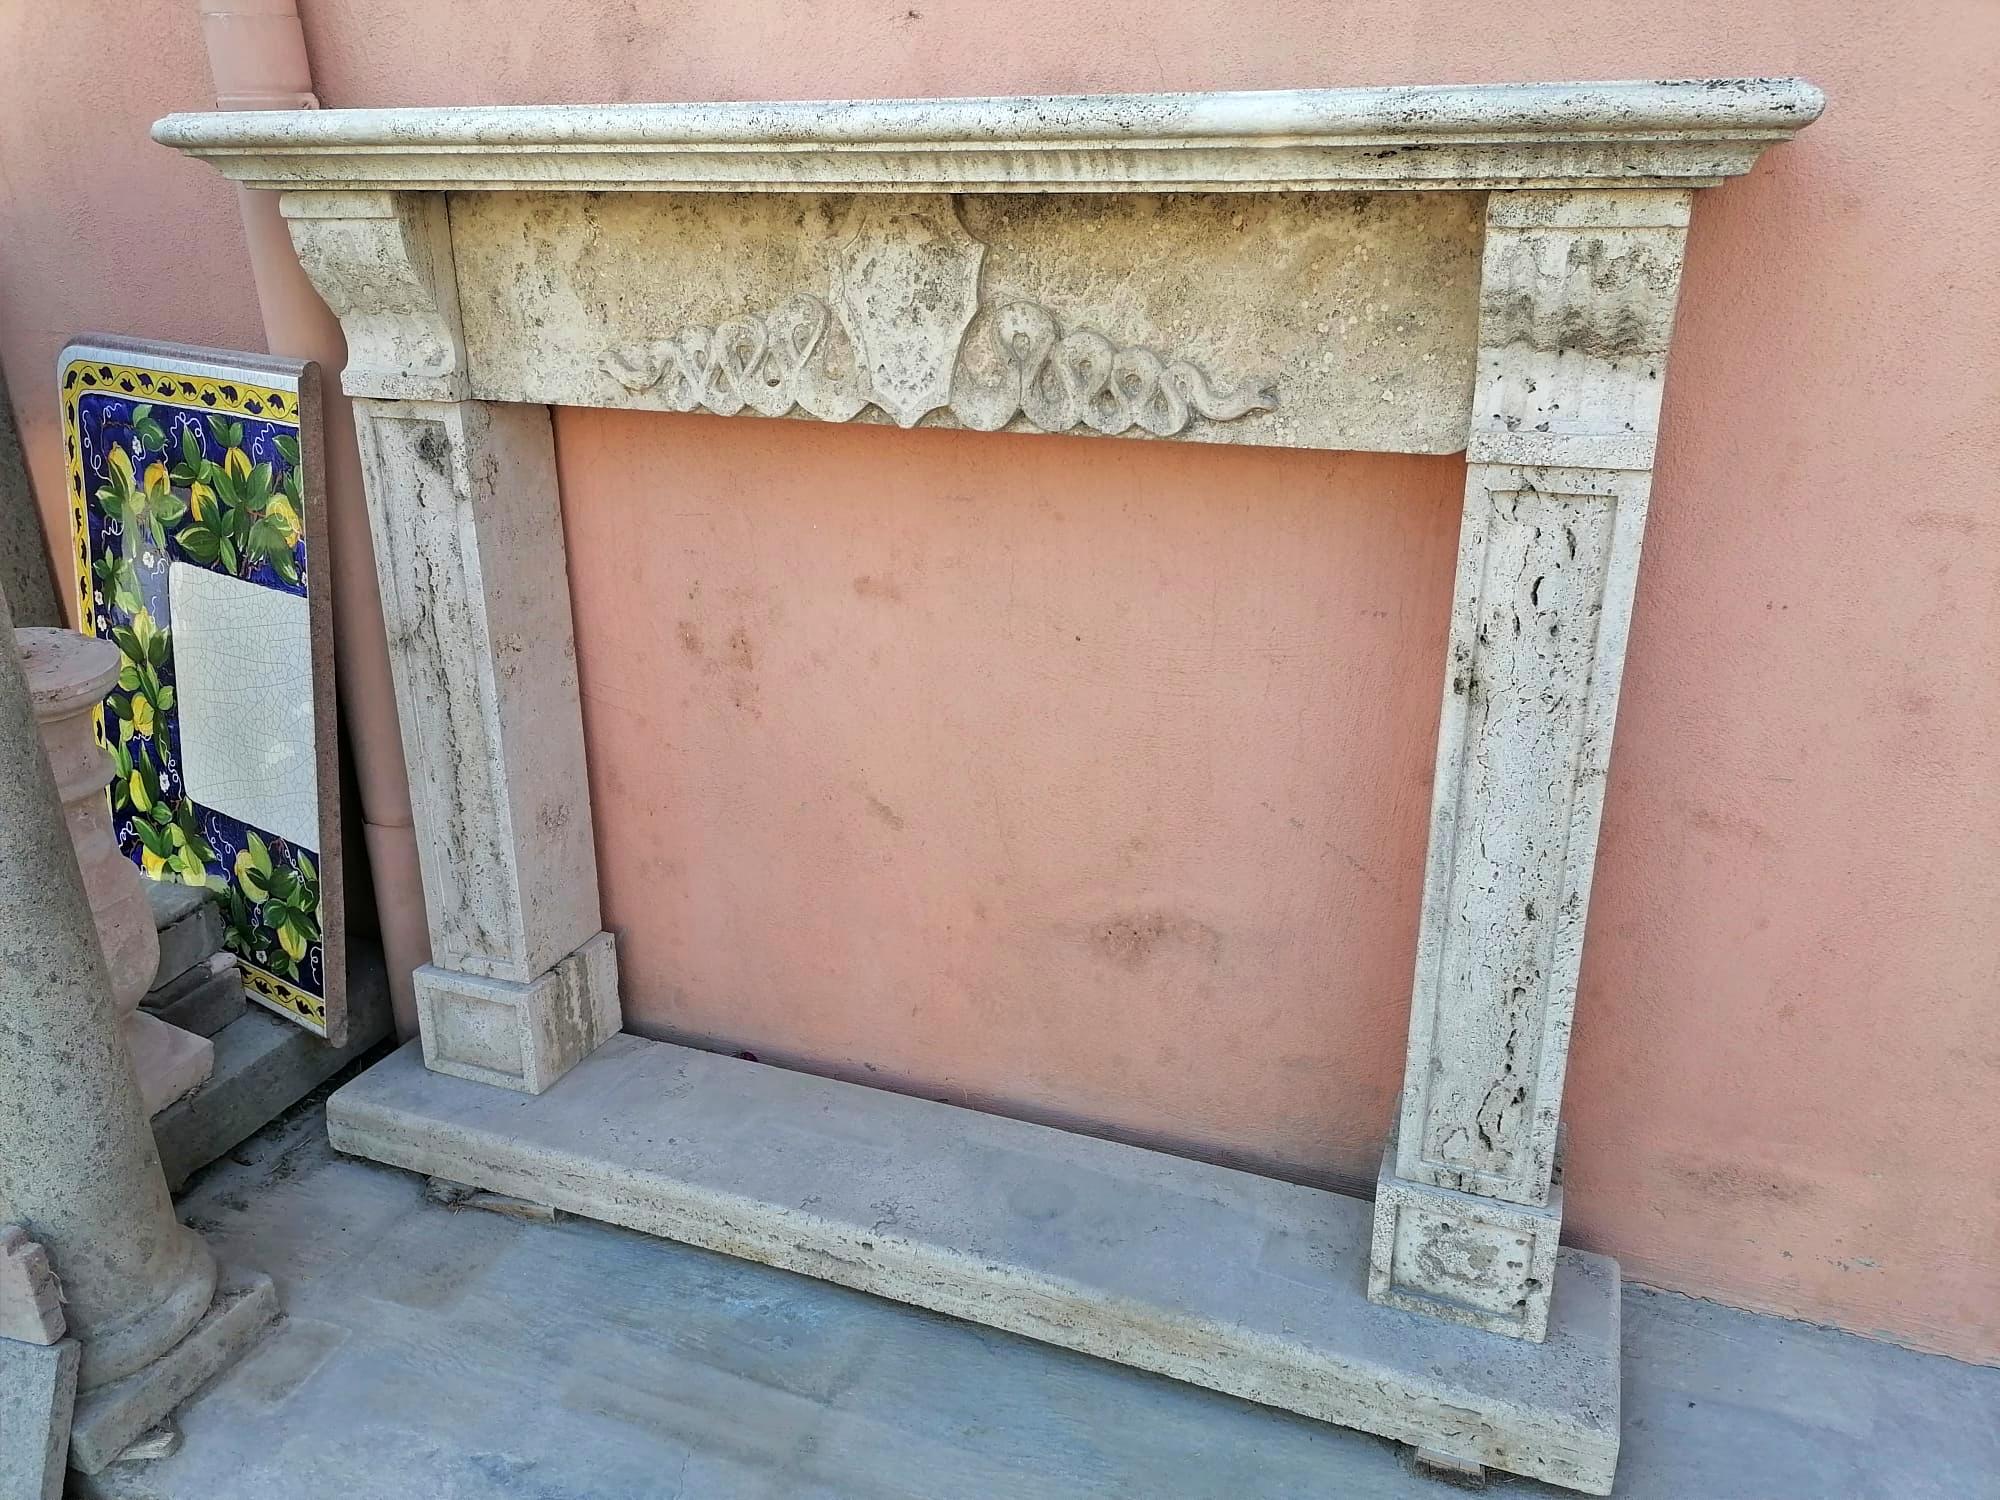 Fireplace in Italian travertine marble.
Early 20th century
Height: 127cm
Width: 160cm
In excellent condition.